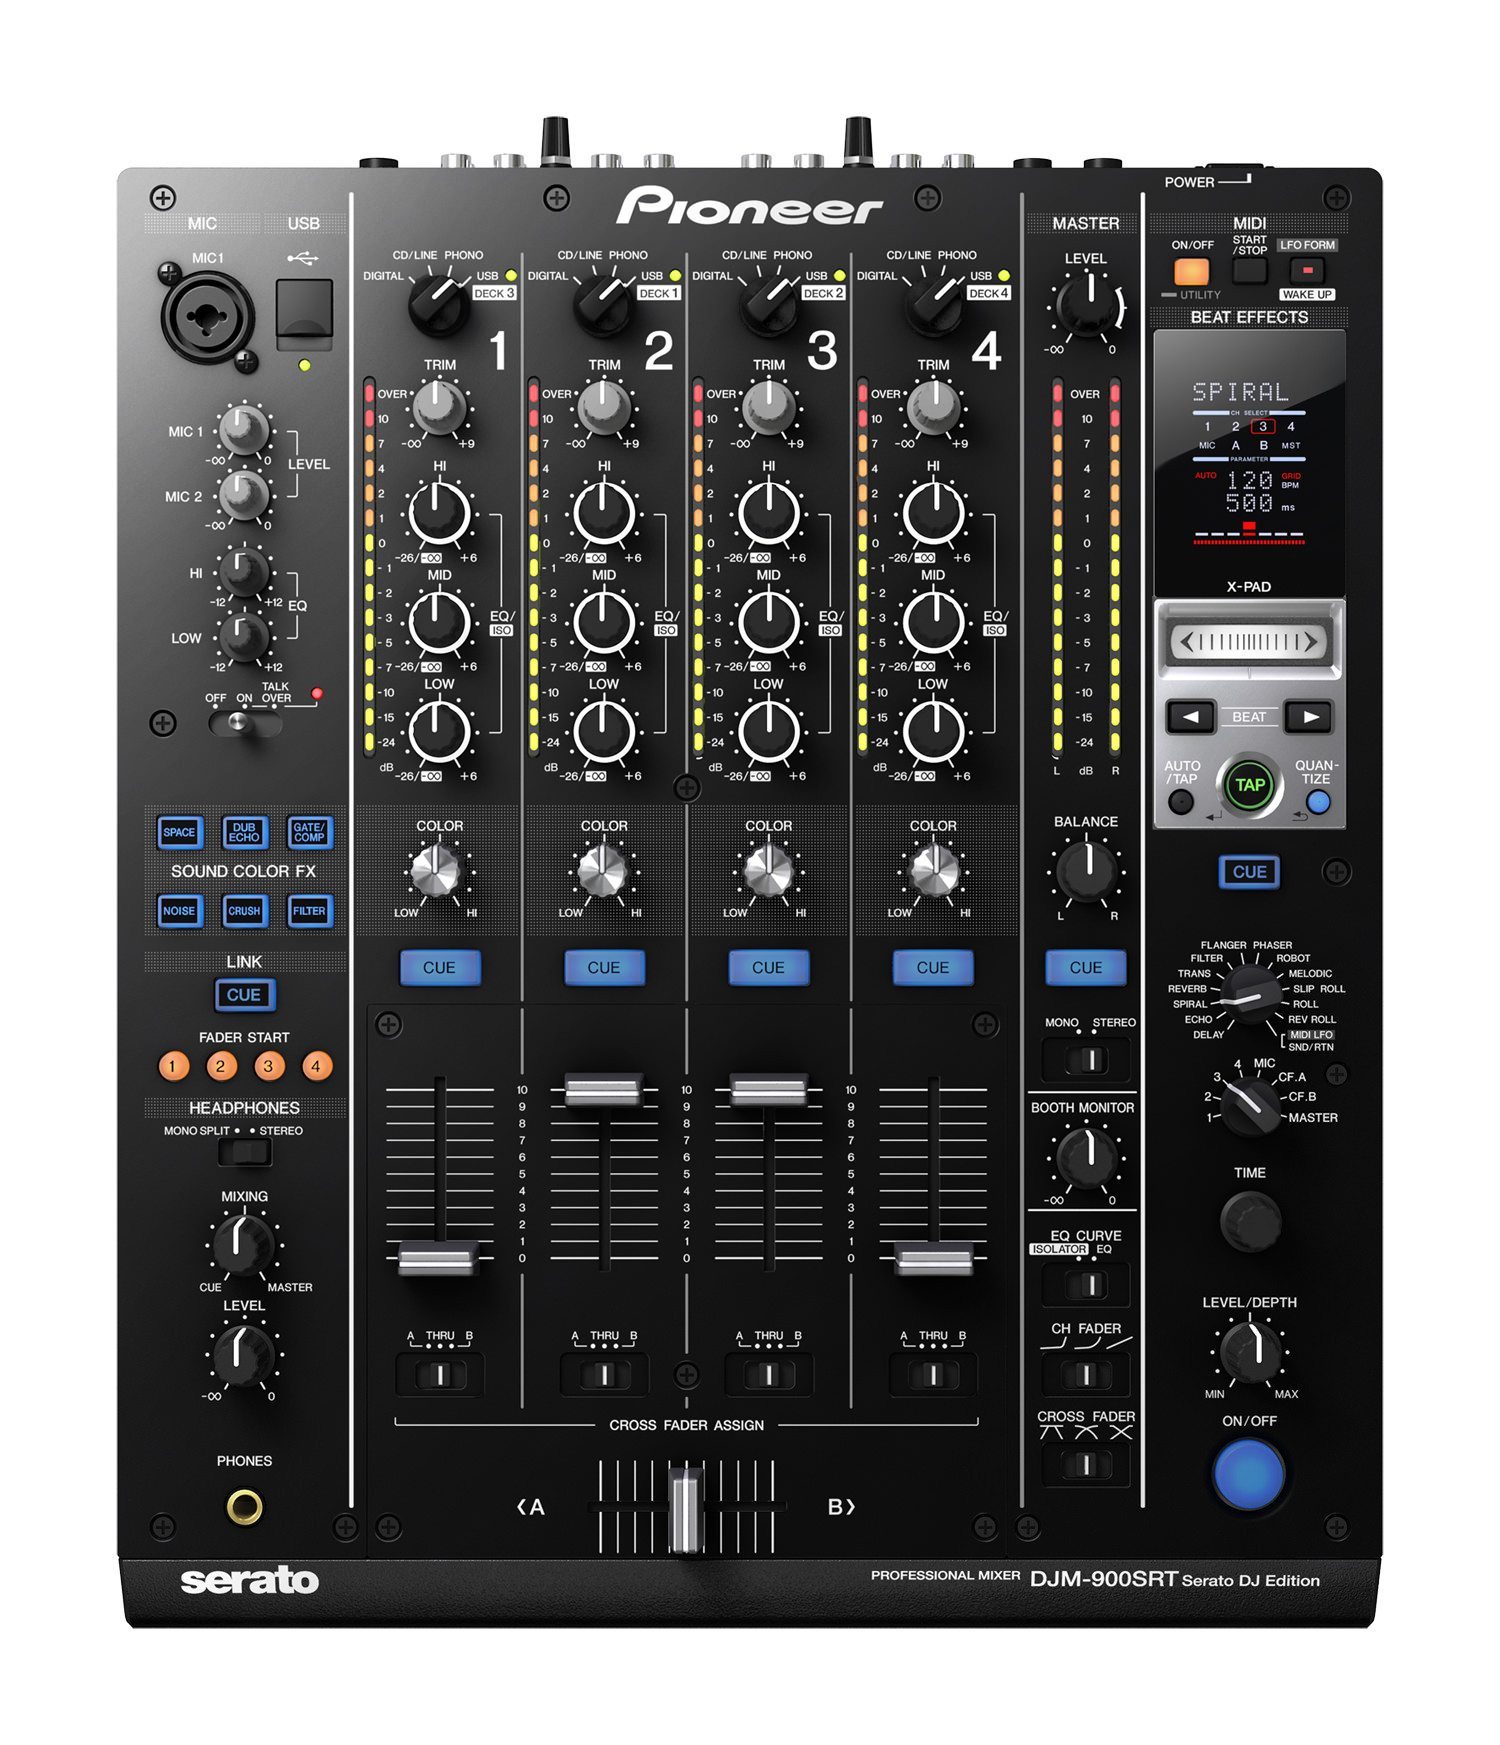 Serato scratch live troubleshooting manual